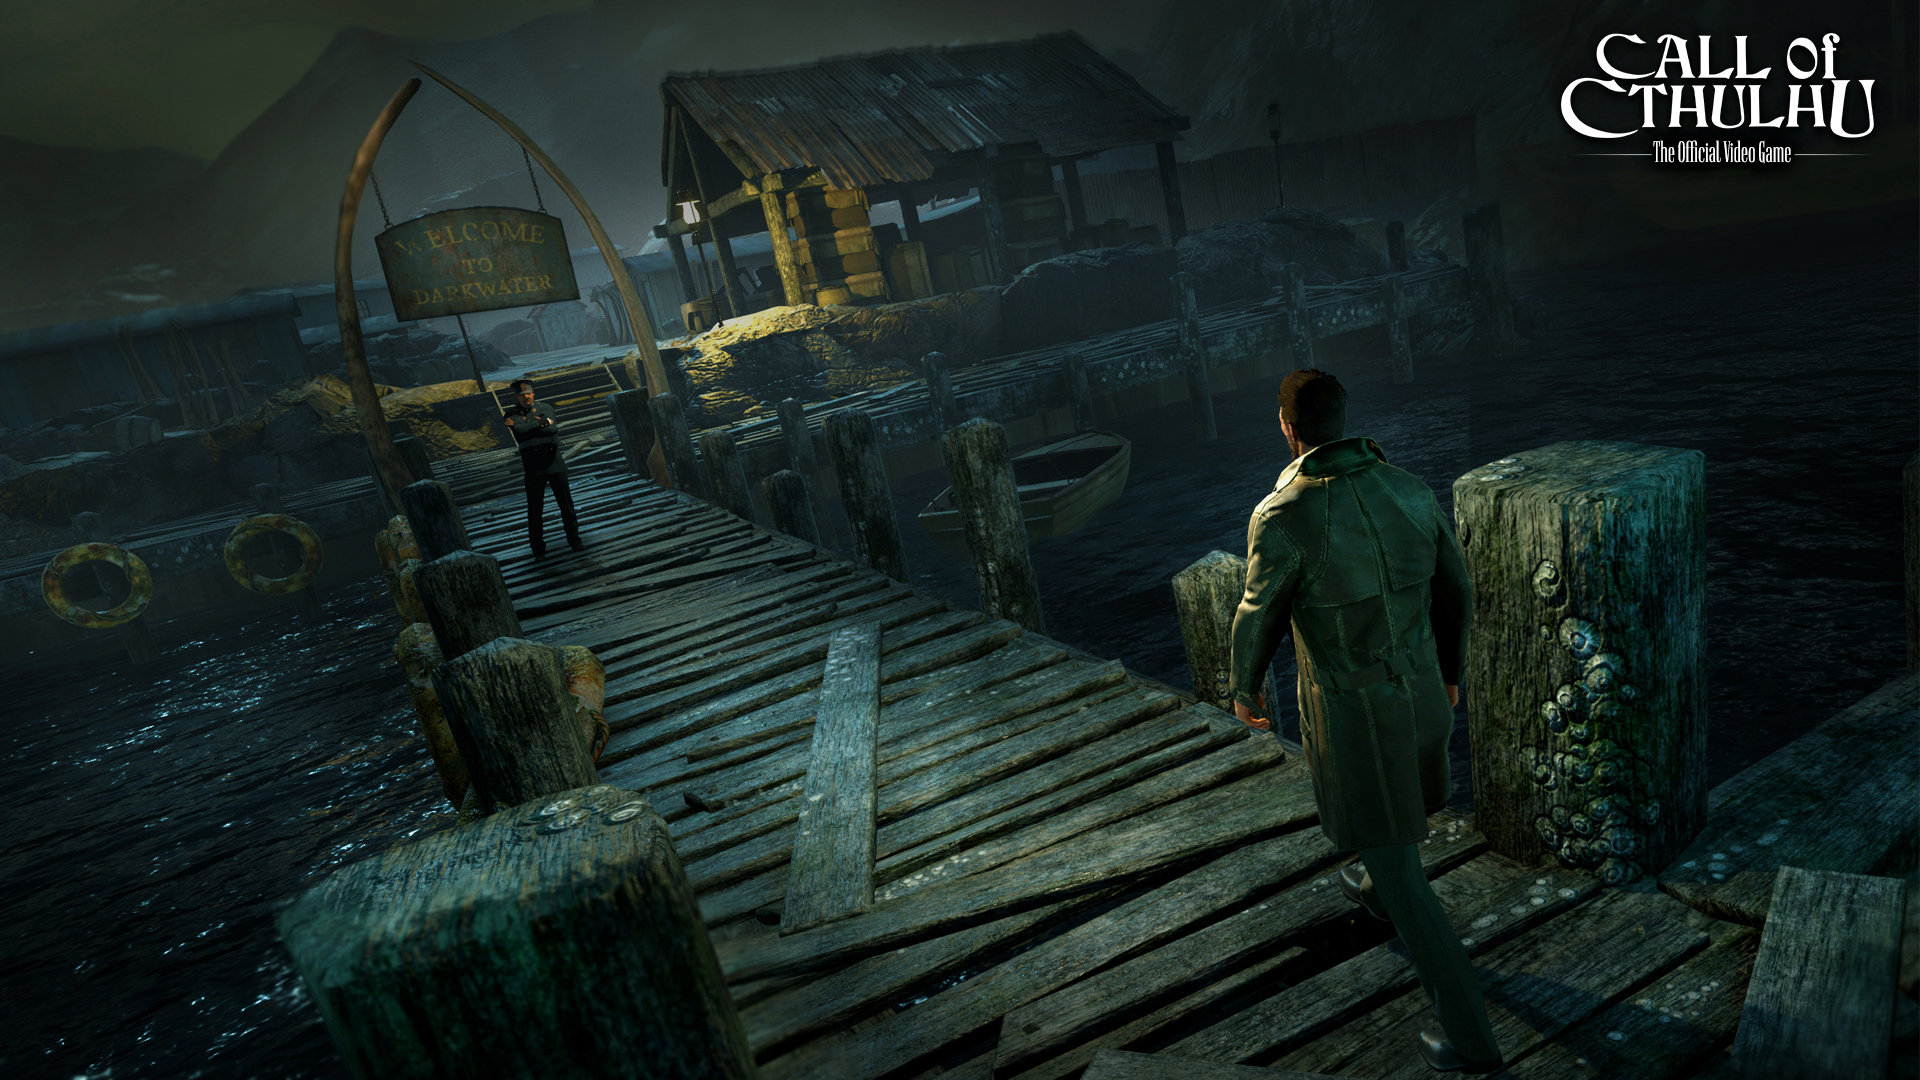 Call of Cthulhu The Official video Game